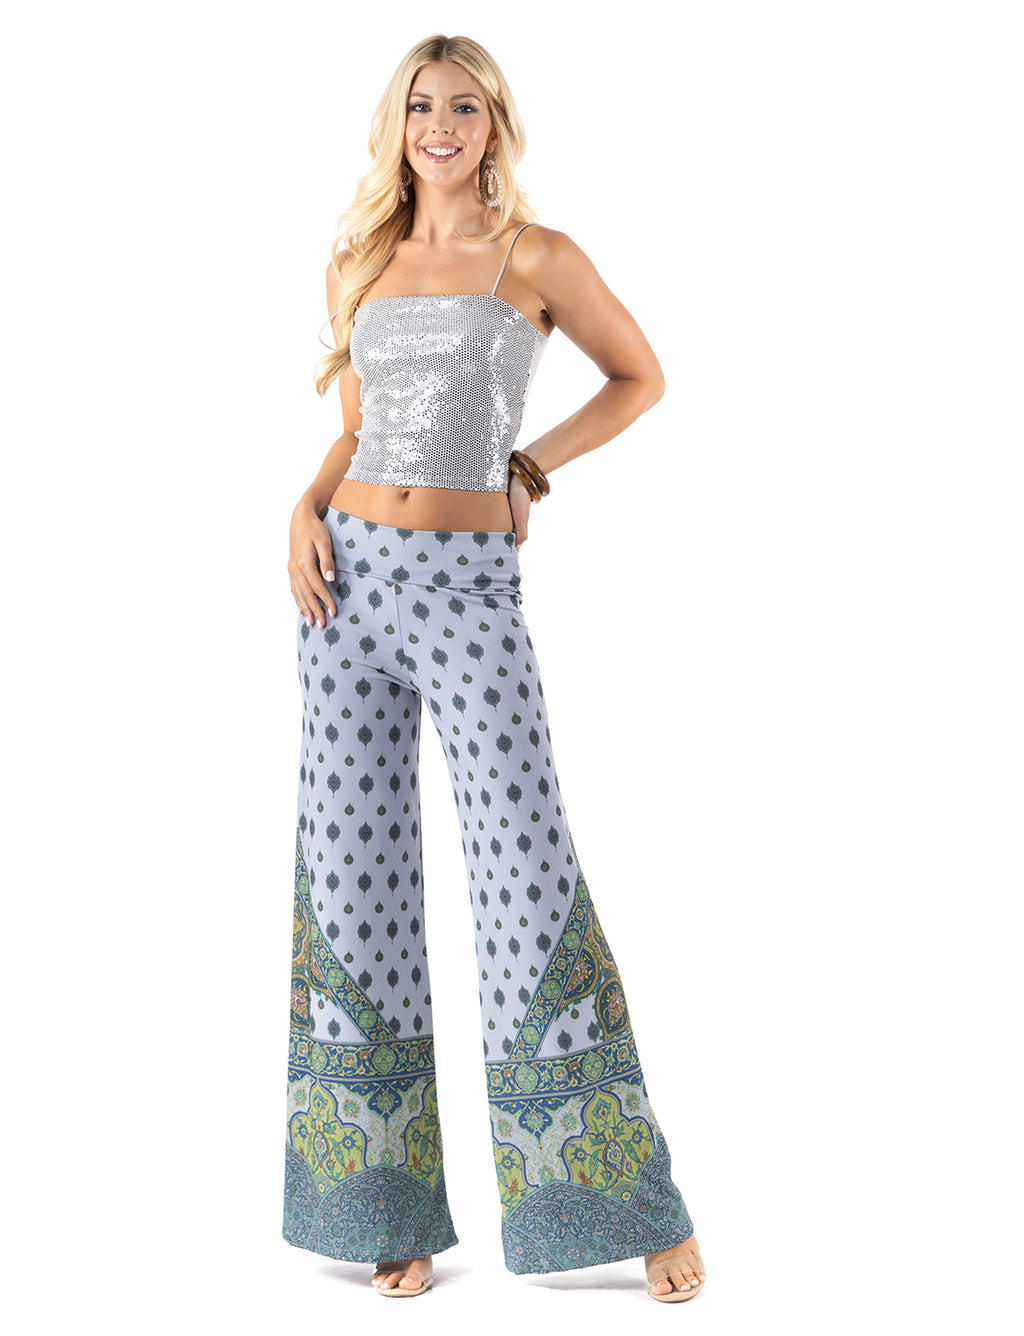 Blue & Green Scroll High waist palazzo pants featuring pockets, wide legs, and a comfortable stretchy fabric ,Perfect during spring, summer,Concerts, Festivals, Dance